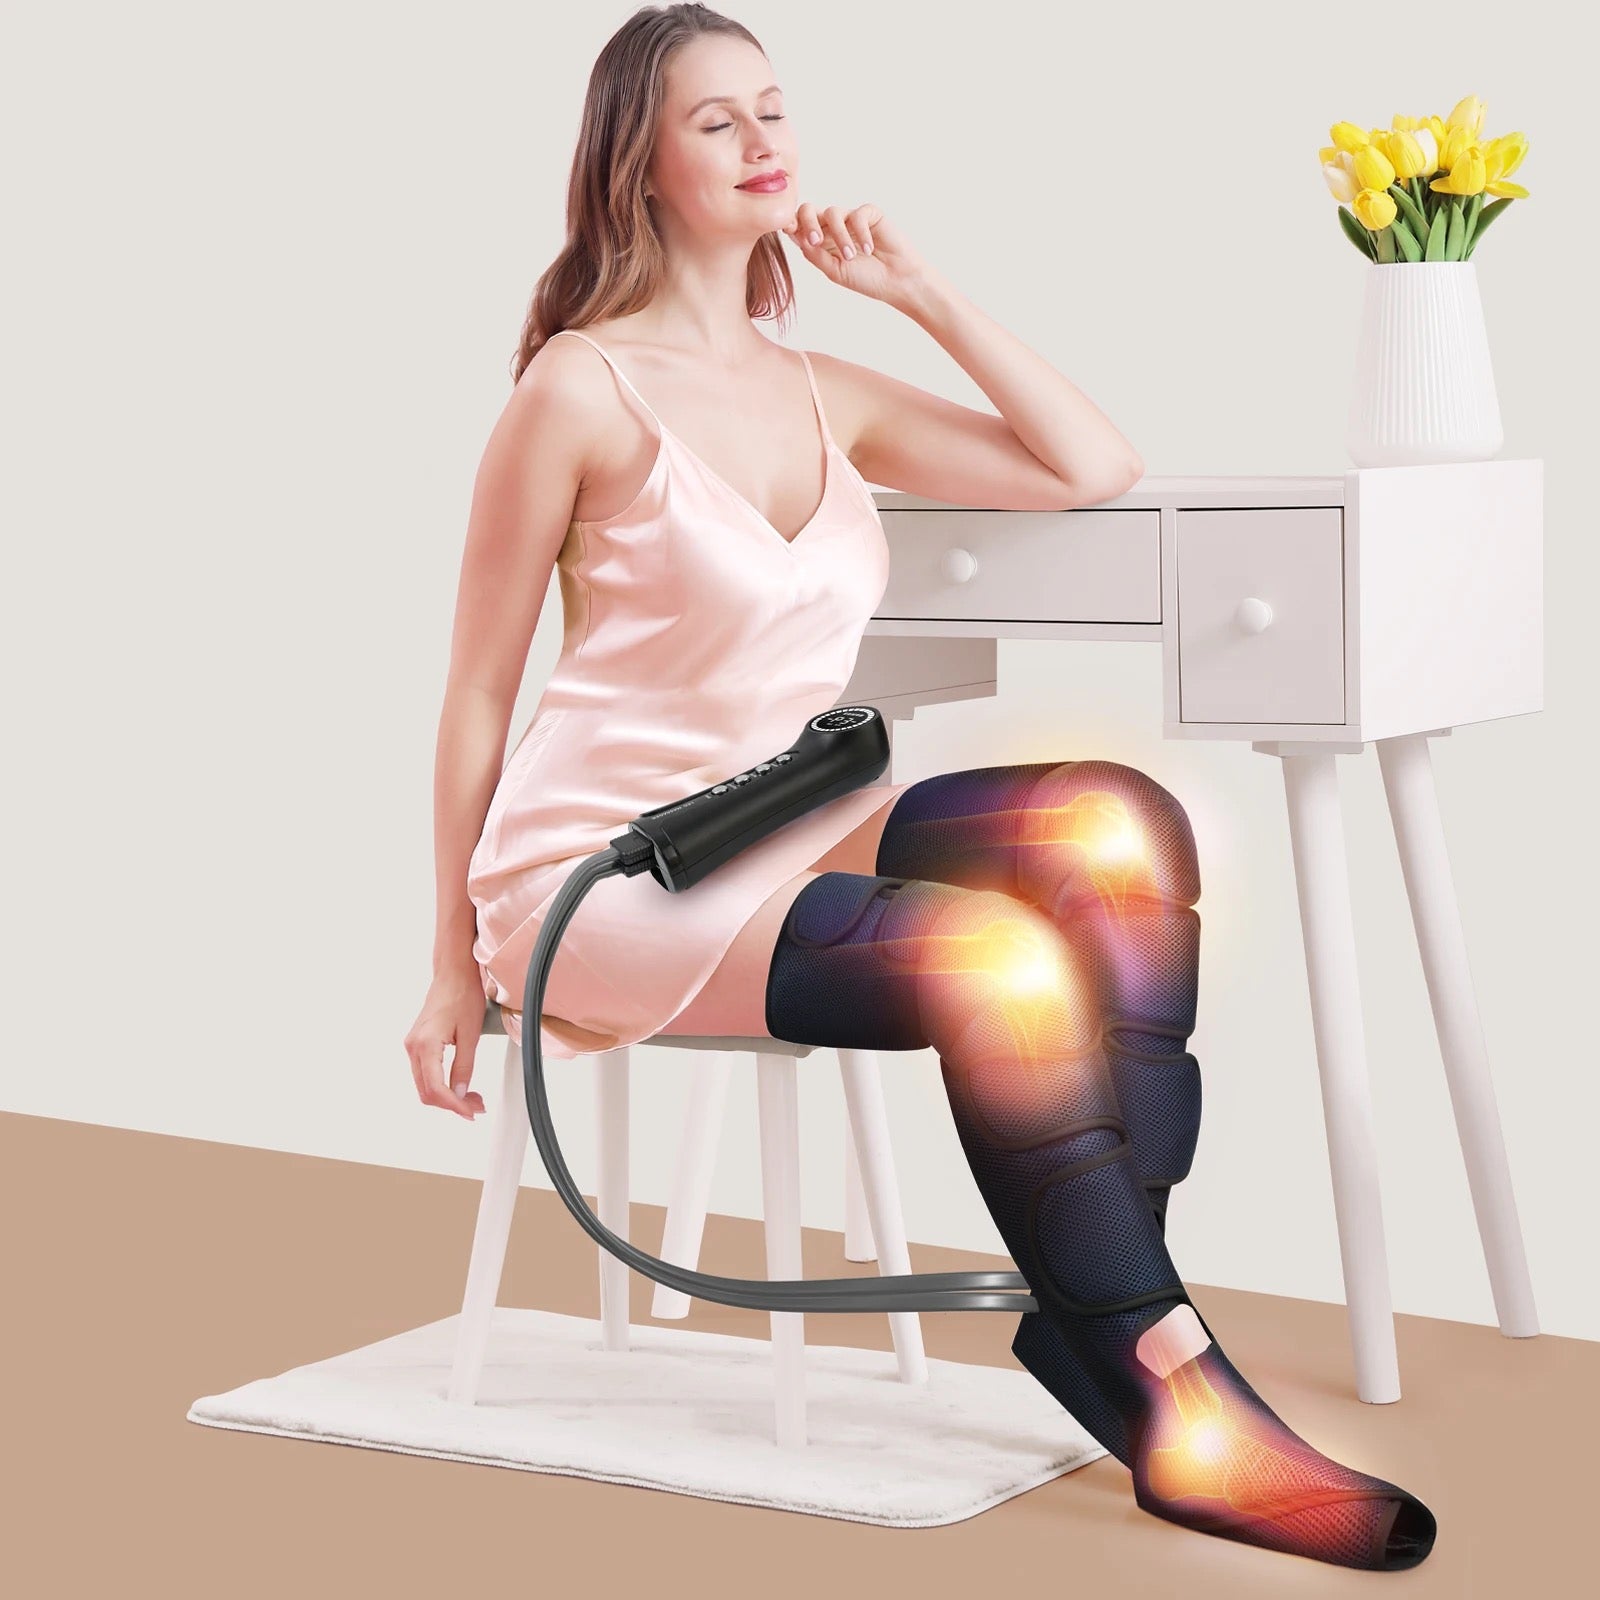 Air Pressure Compression Foot and Leg Massager For Circulation